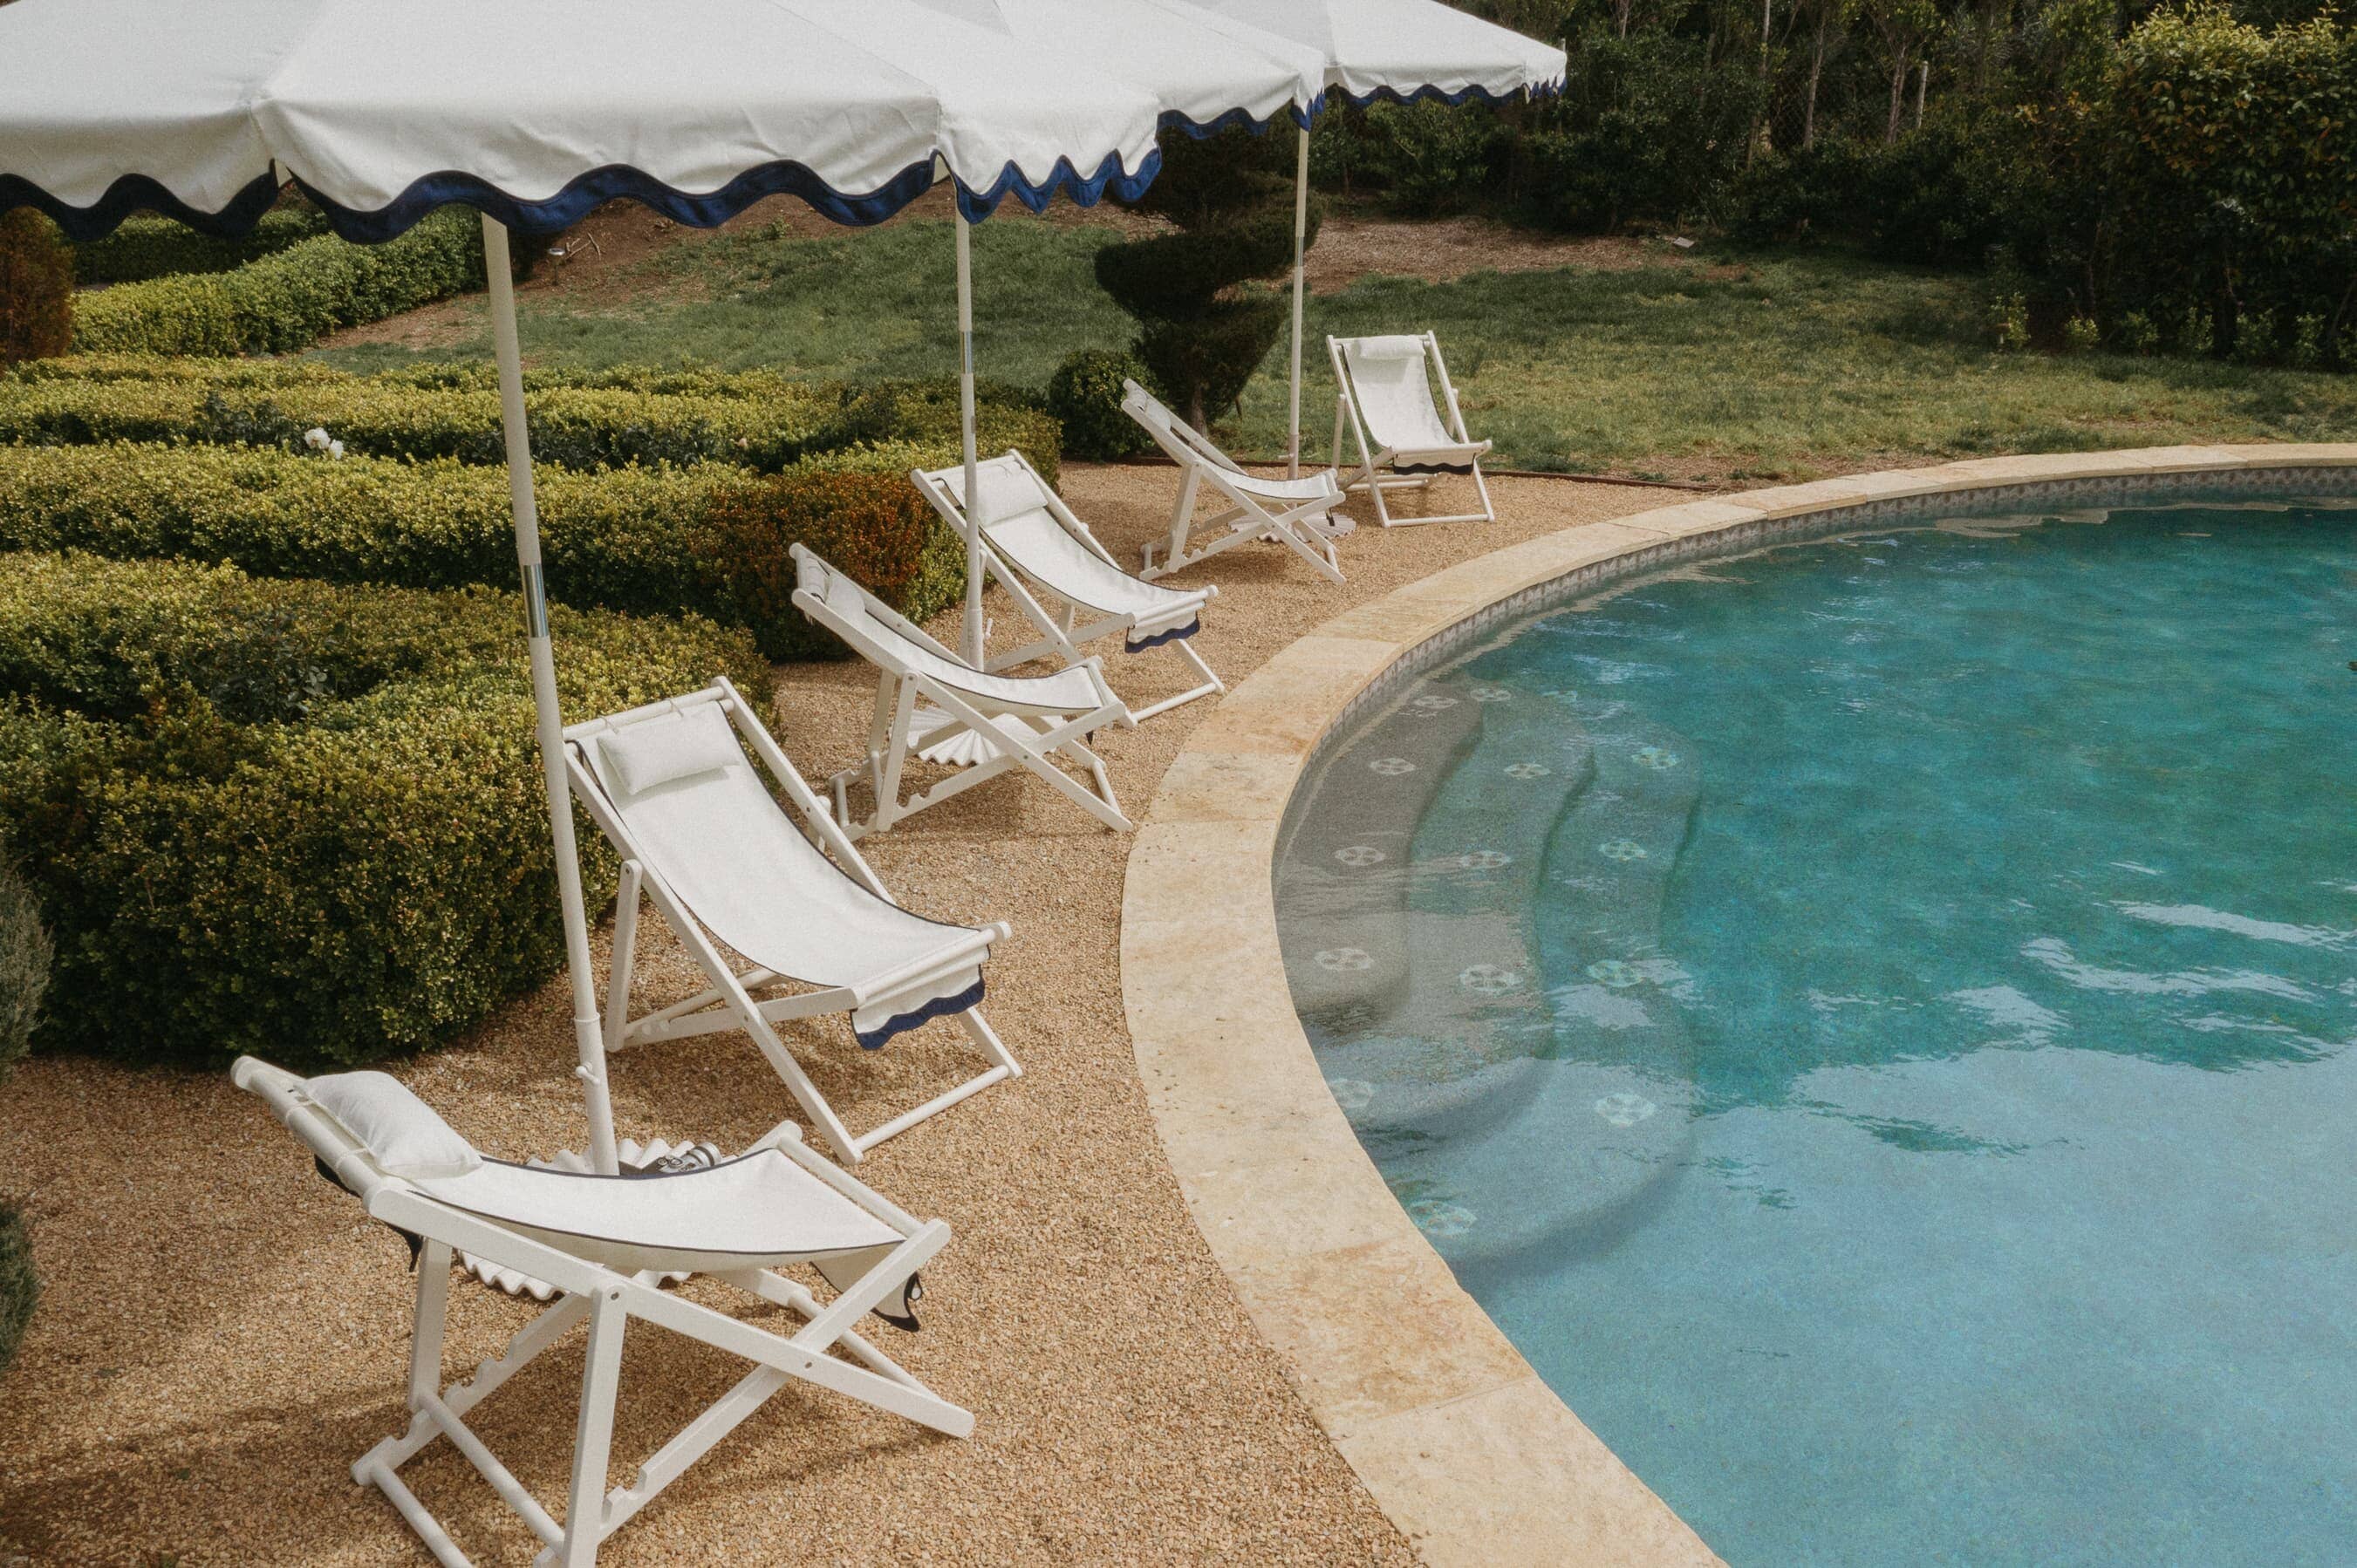 pool setting with riviera white sling chairs and market umbrellas